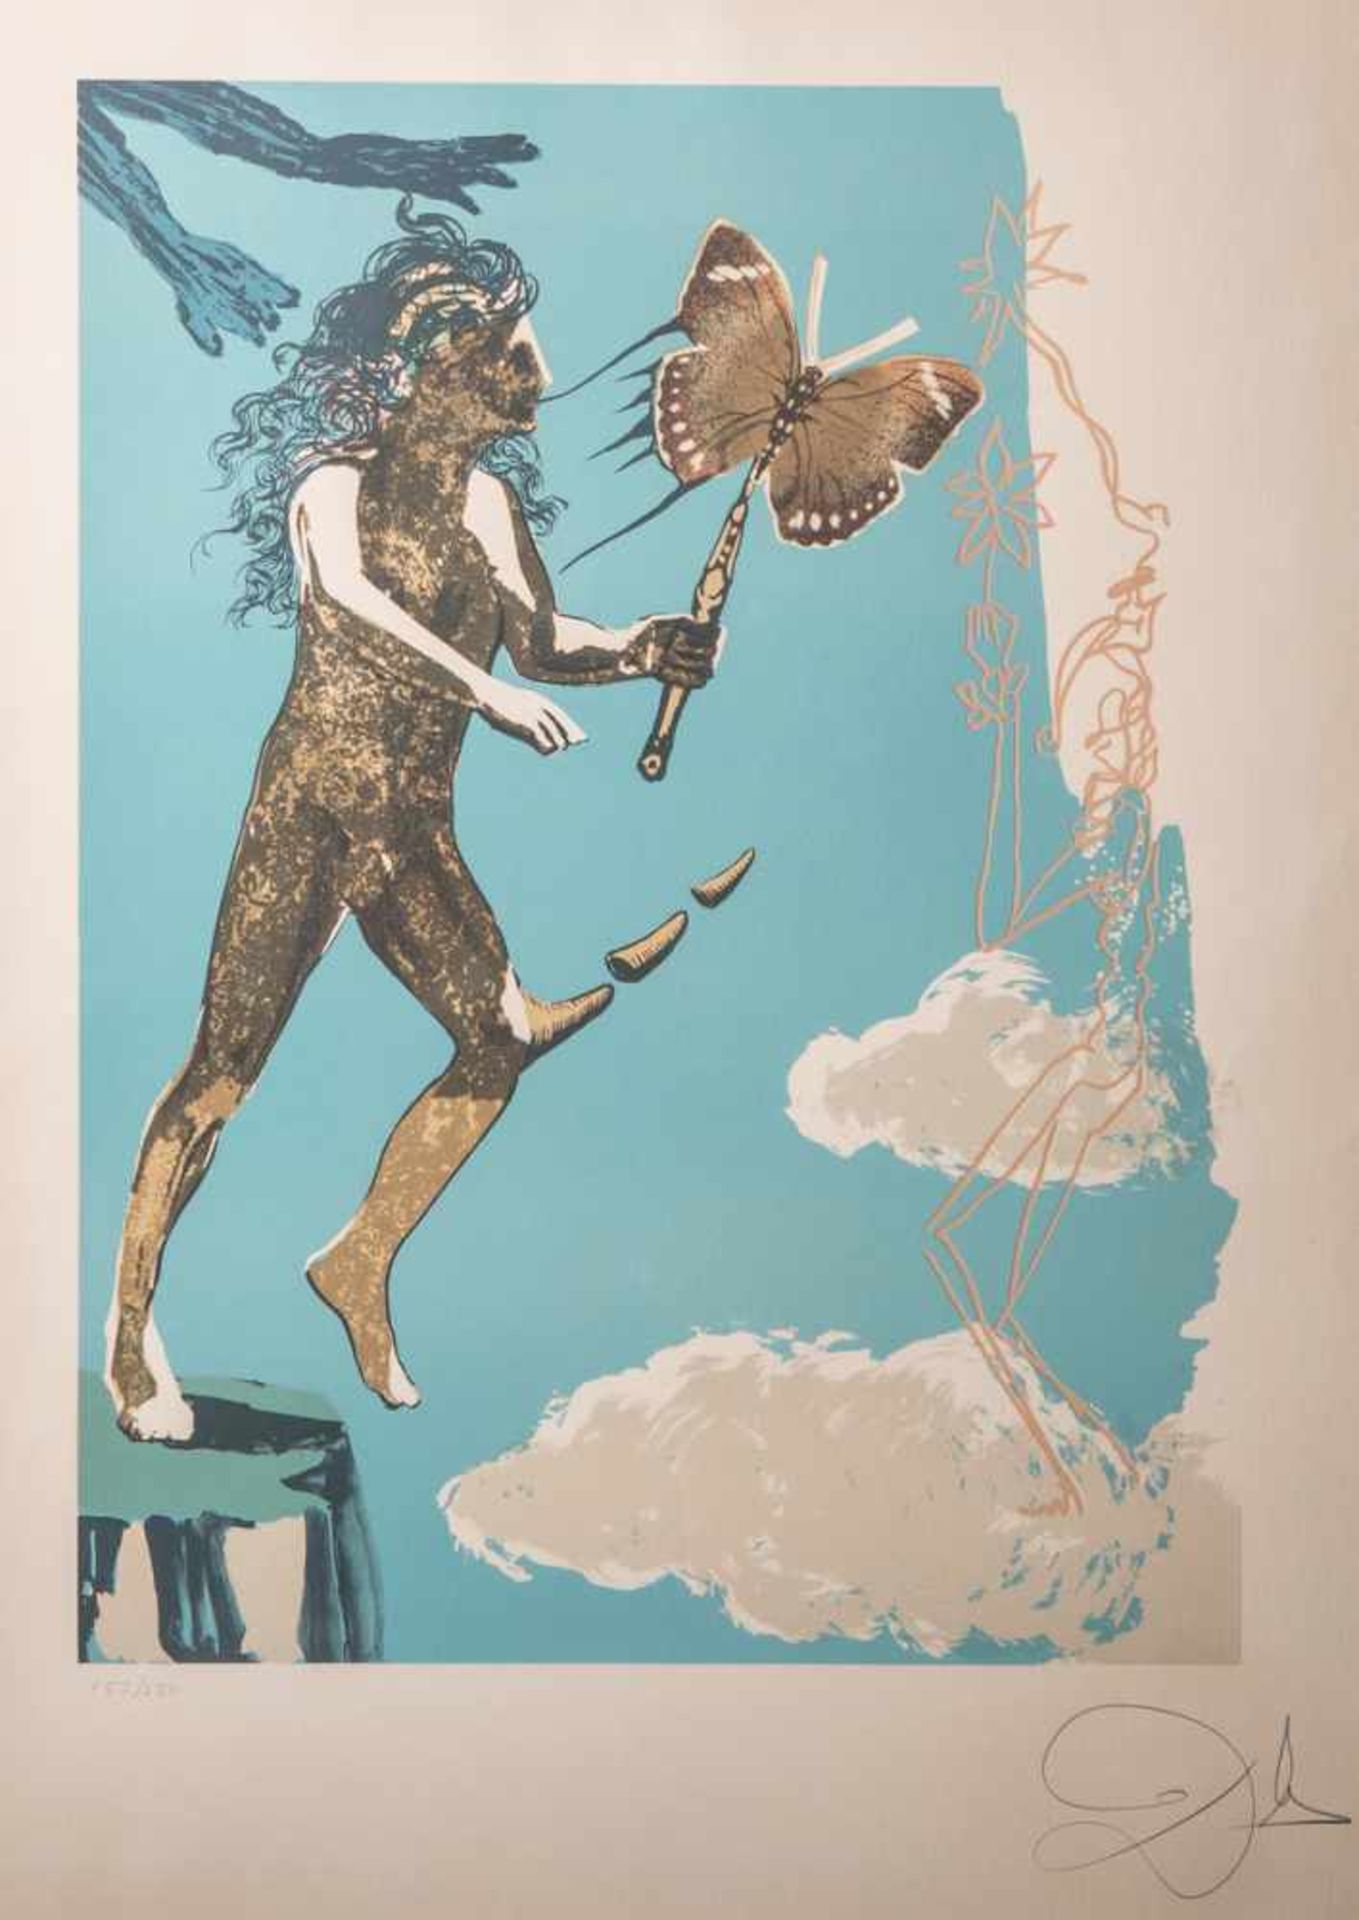 Dalí, Salvador (1904 - 1989), "Release of the Psychic Spirit from the Magic Butterfly andthe Dream